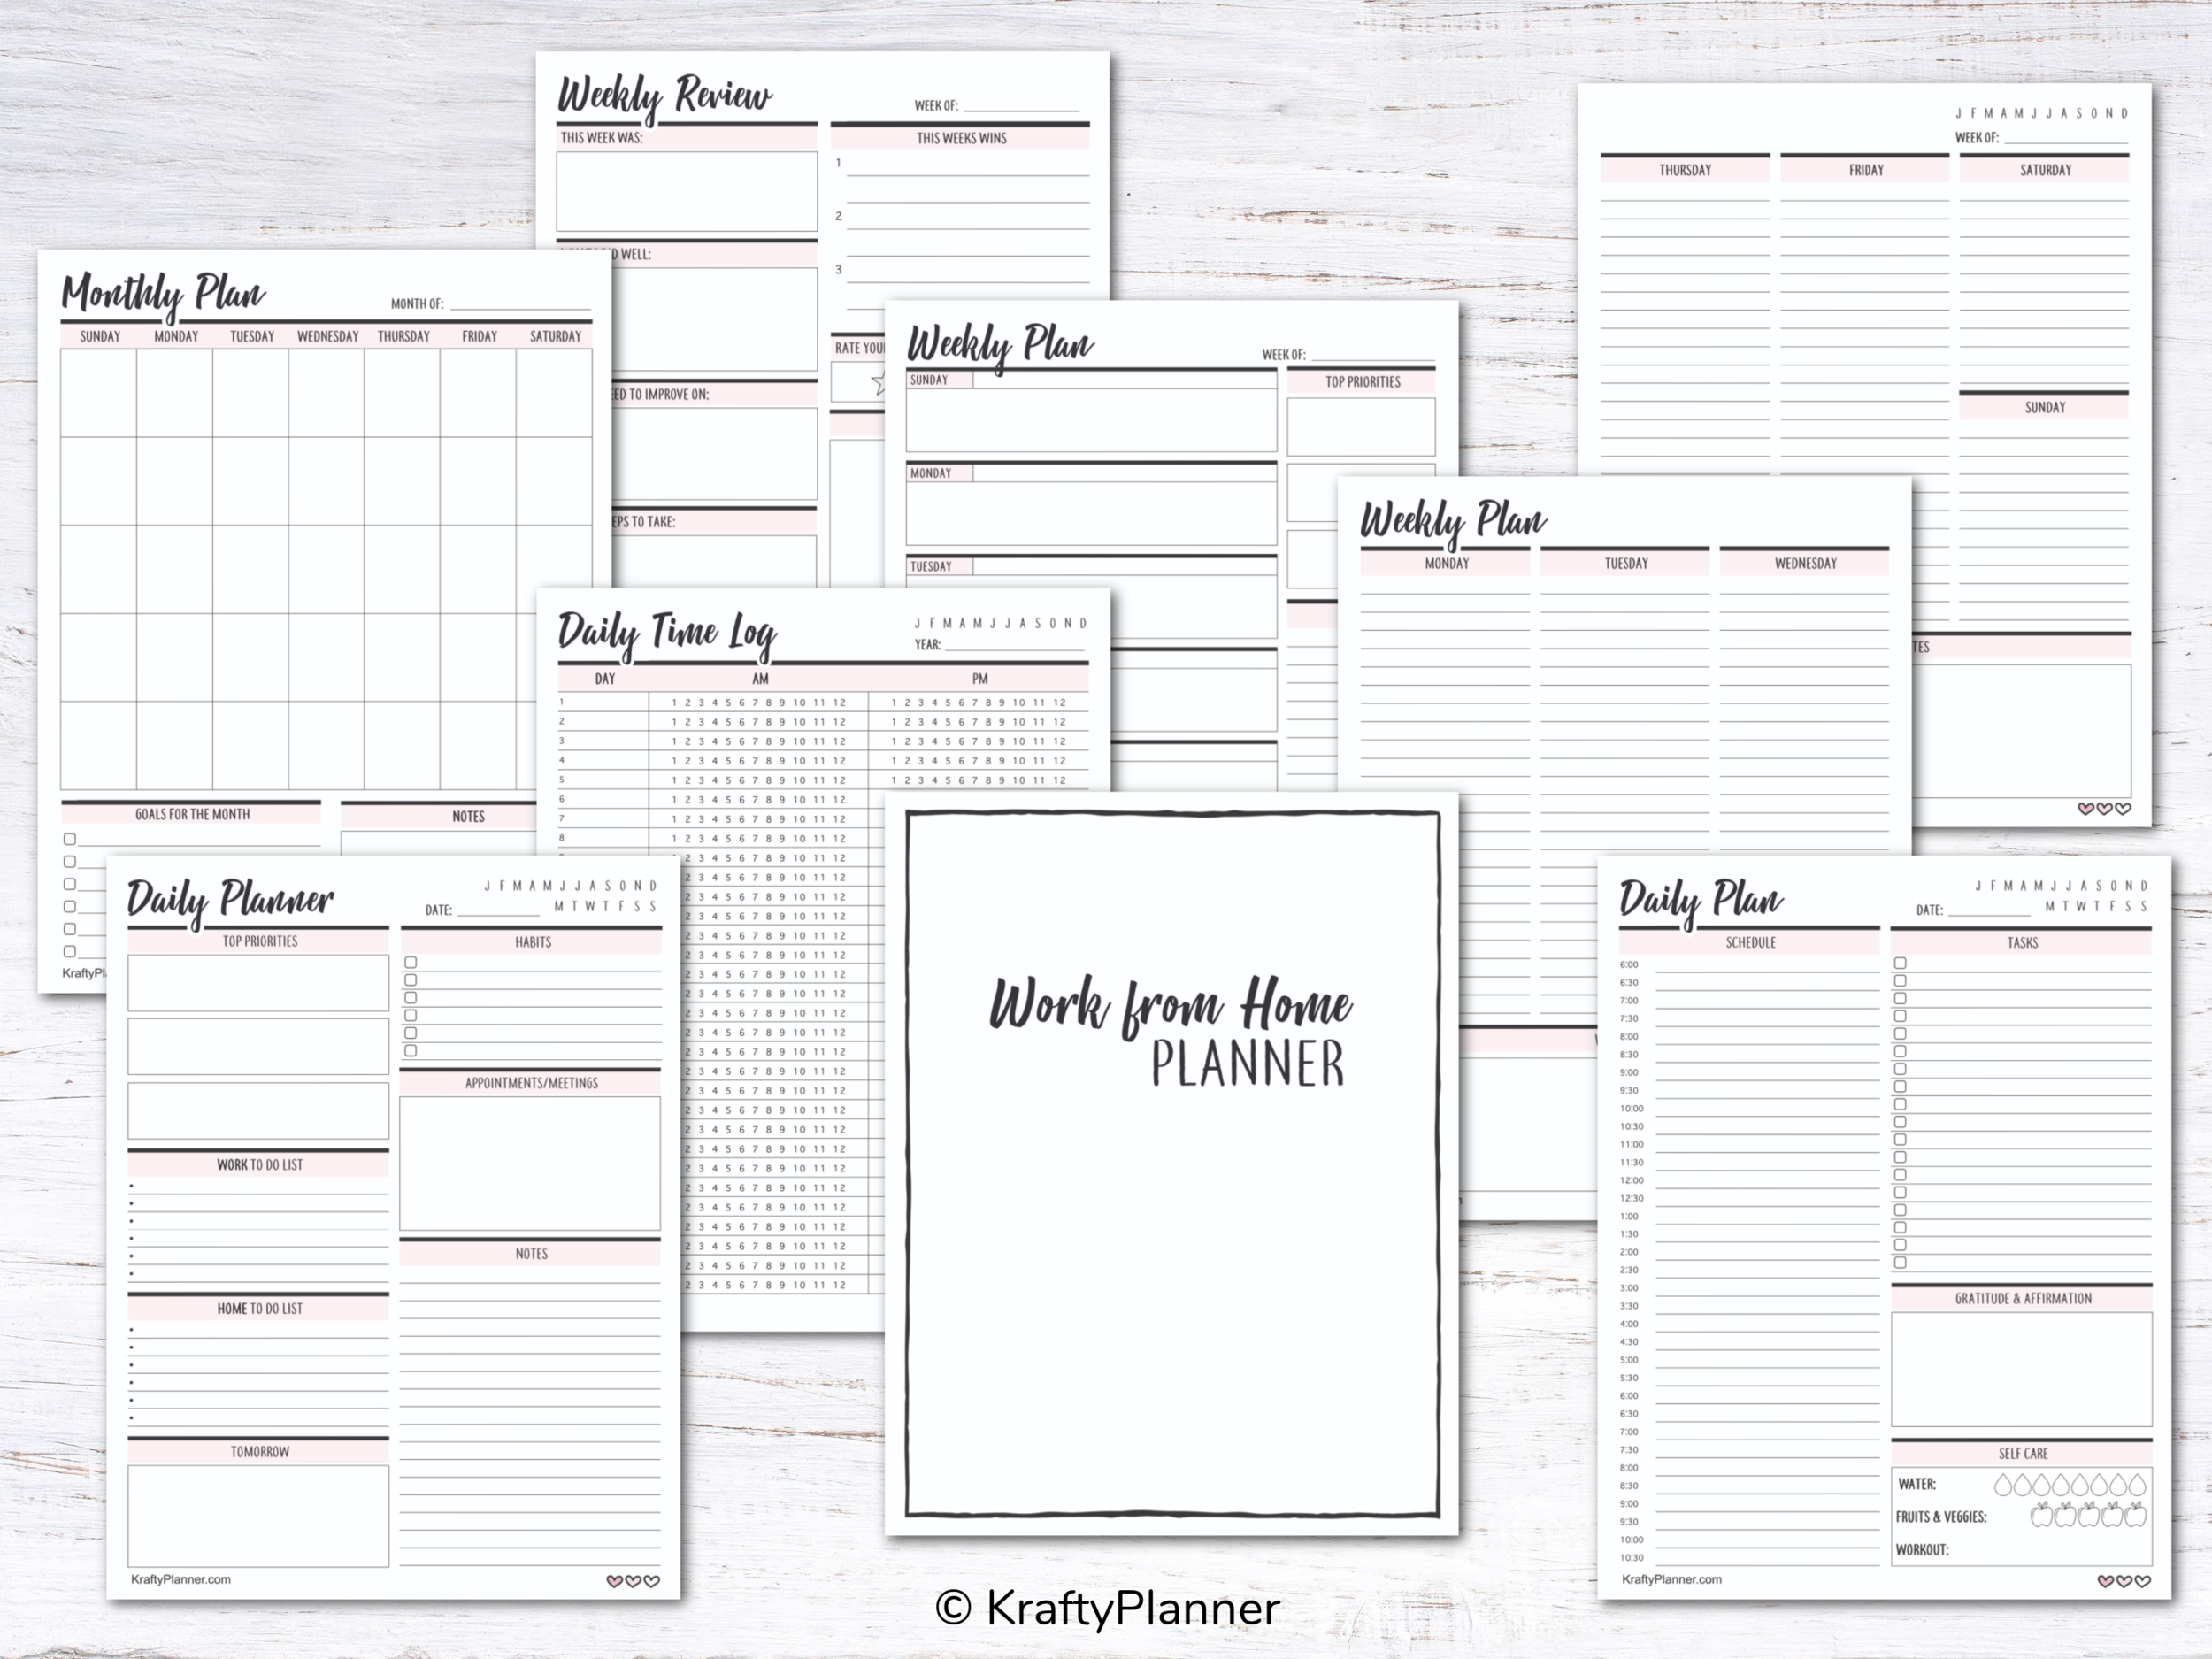 Work From home Planner